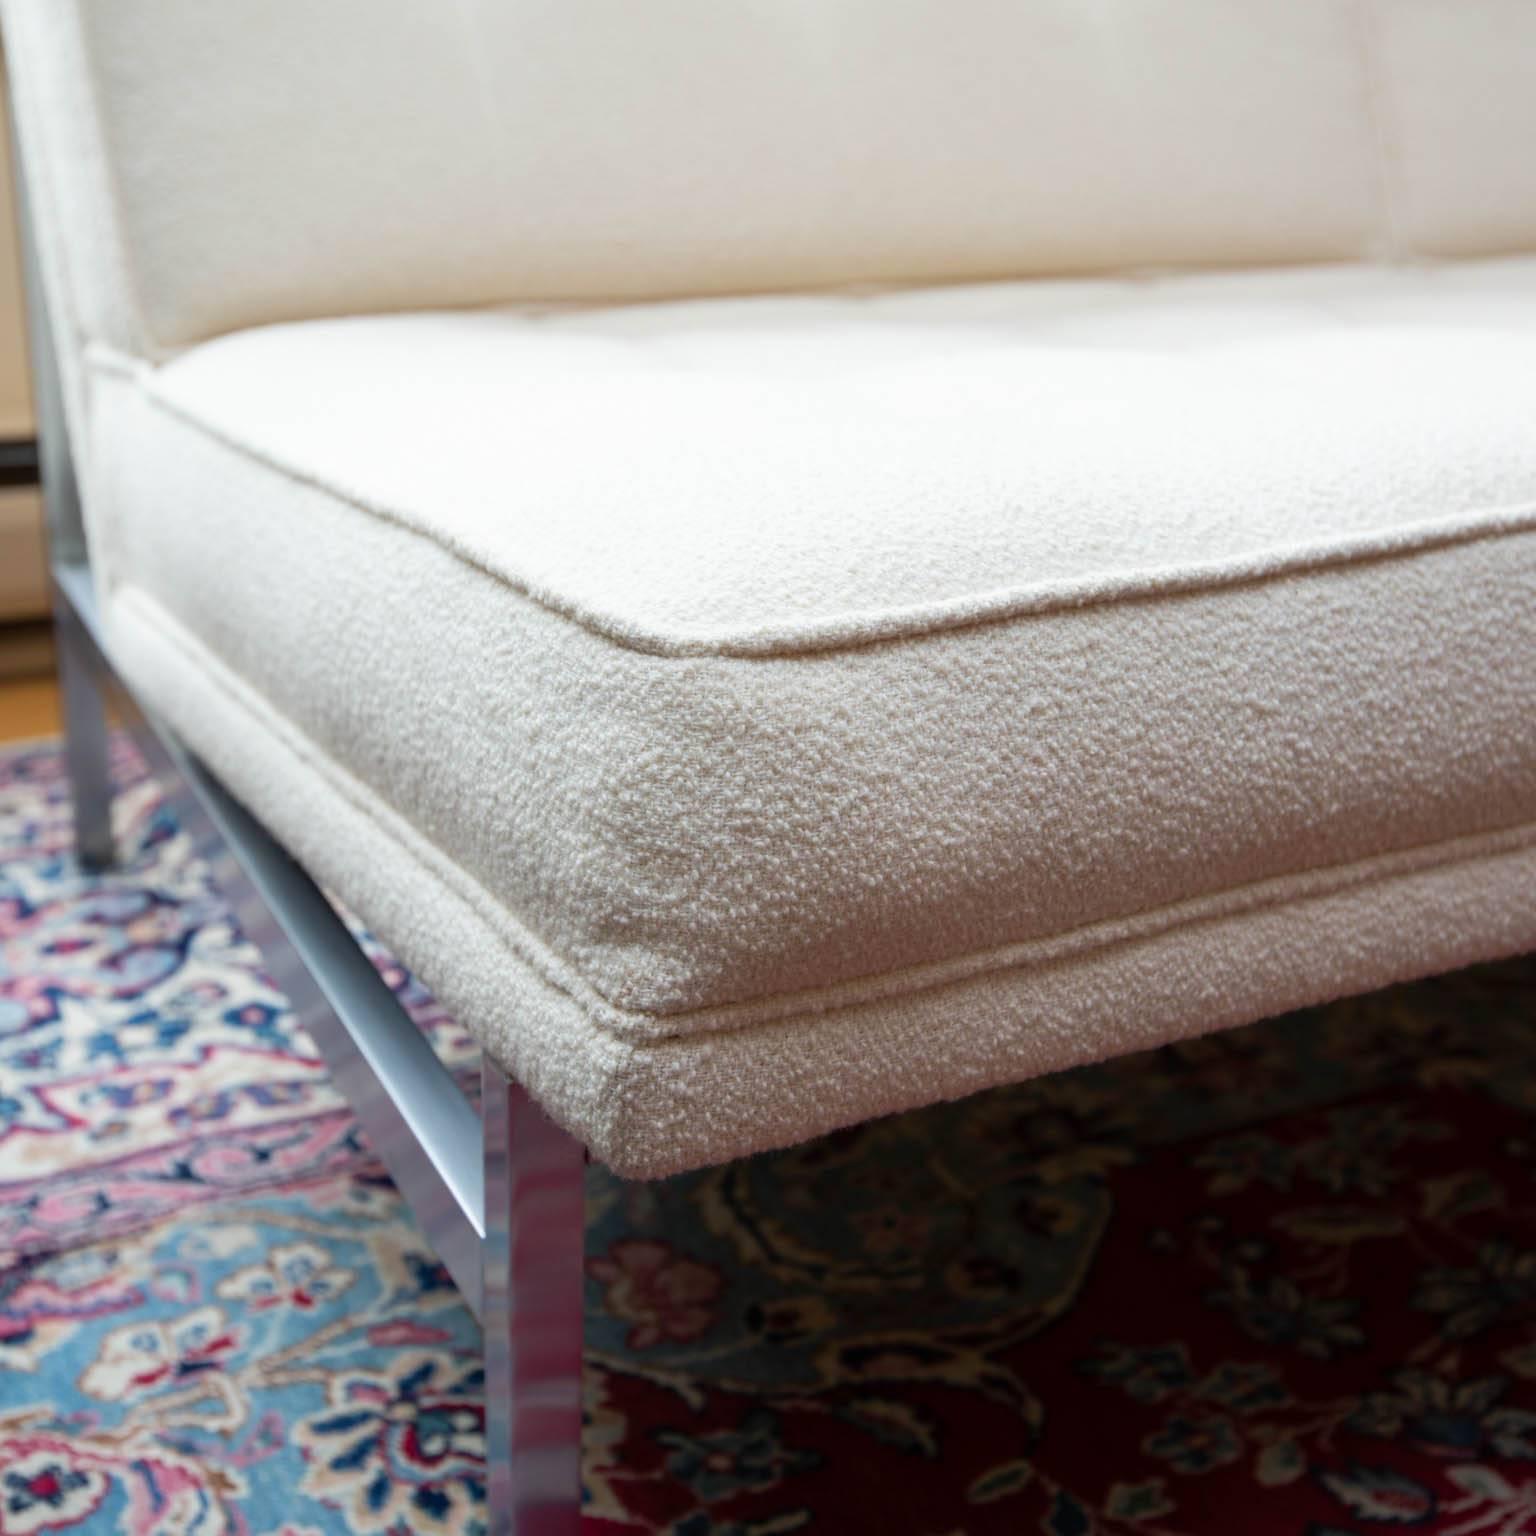 Super clean sofa from 1962 with the original Knoll fabric.